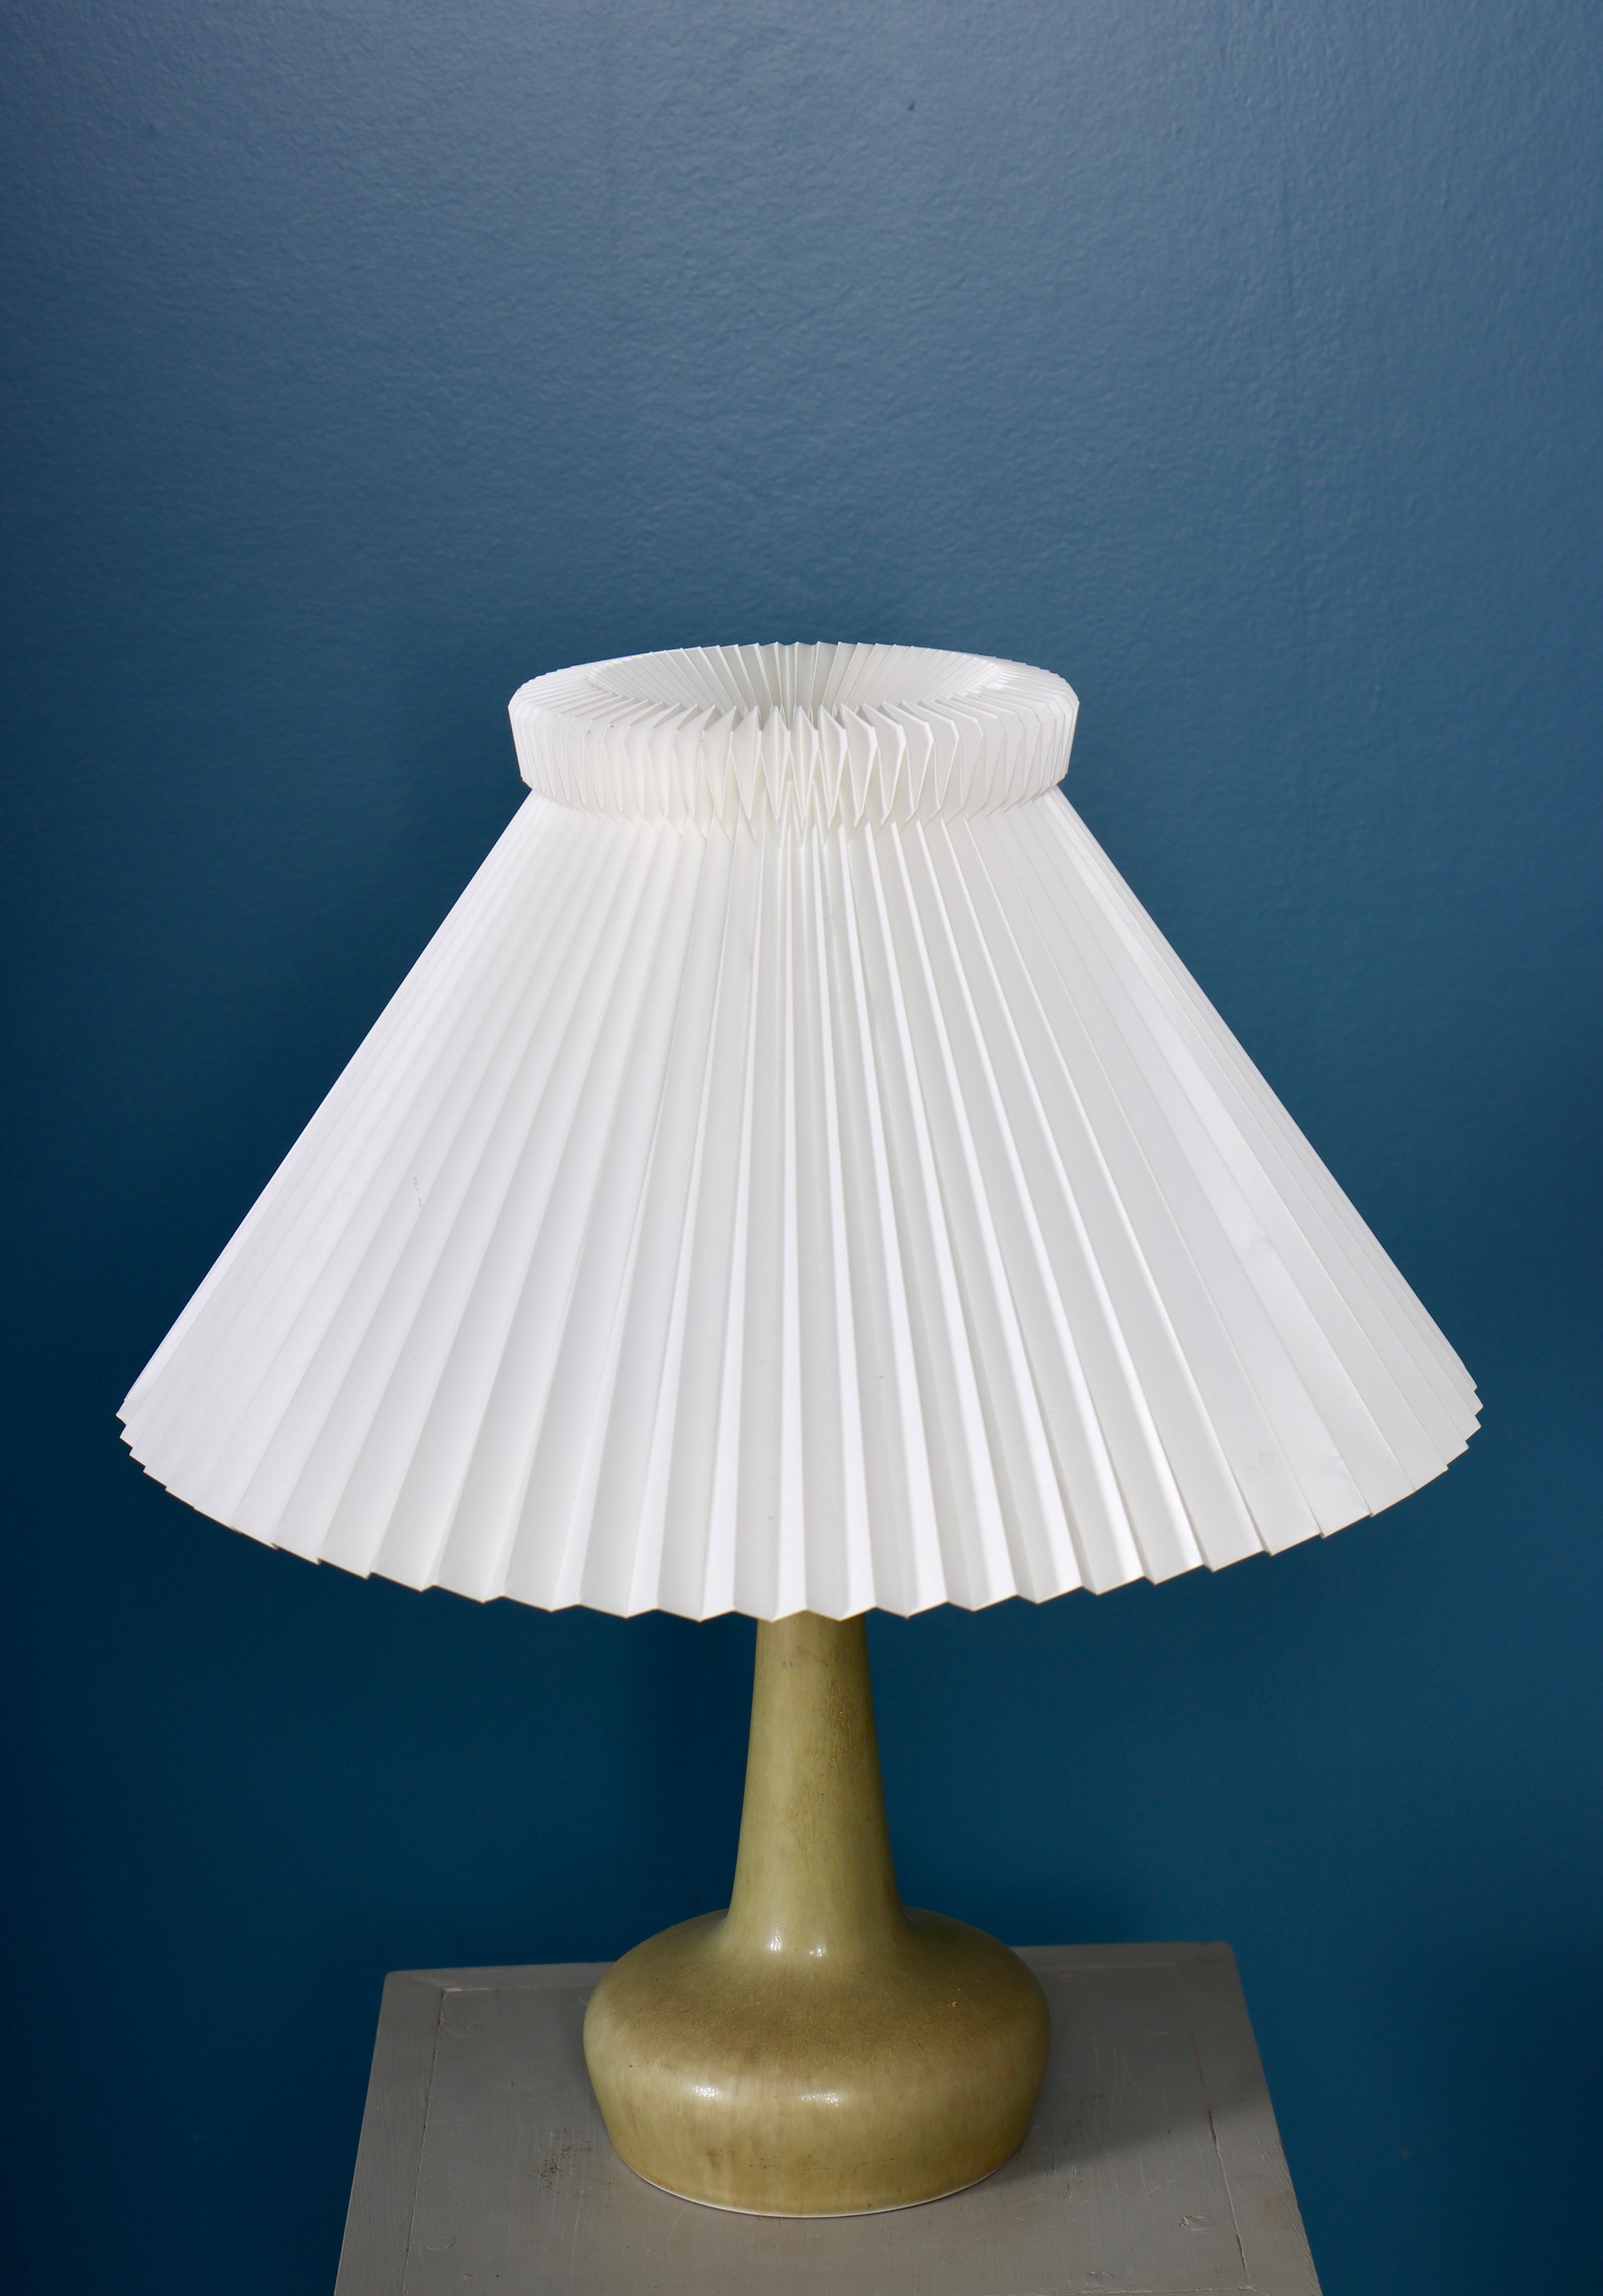 Scandinavian Modern Table Lamp by Palshus with Le Klint Shade, 1960s For Sale